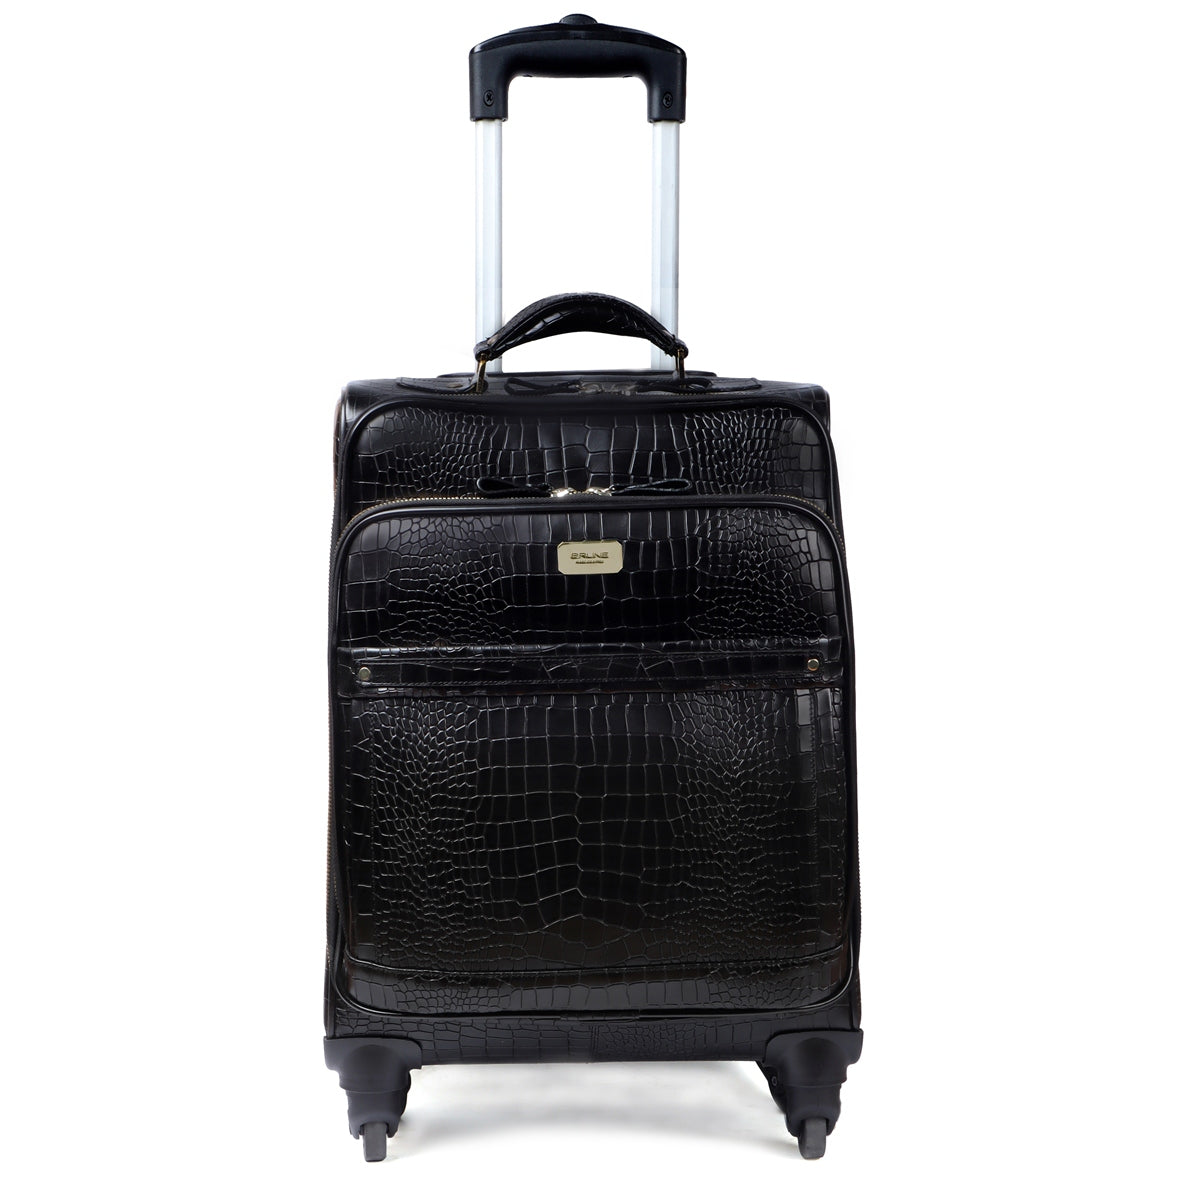 WINE LEATHER CABIN LUGGAGE TROLLEY BAG WITH 4 WHEEL (360 ROTATION)